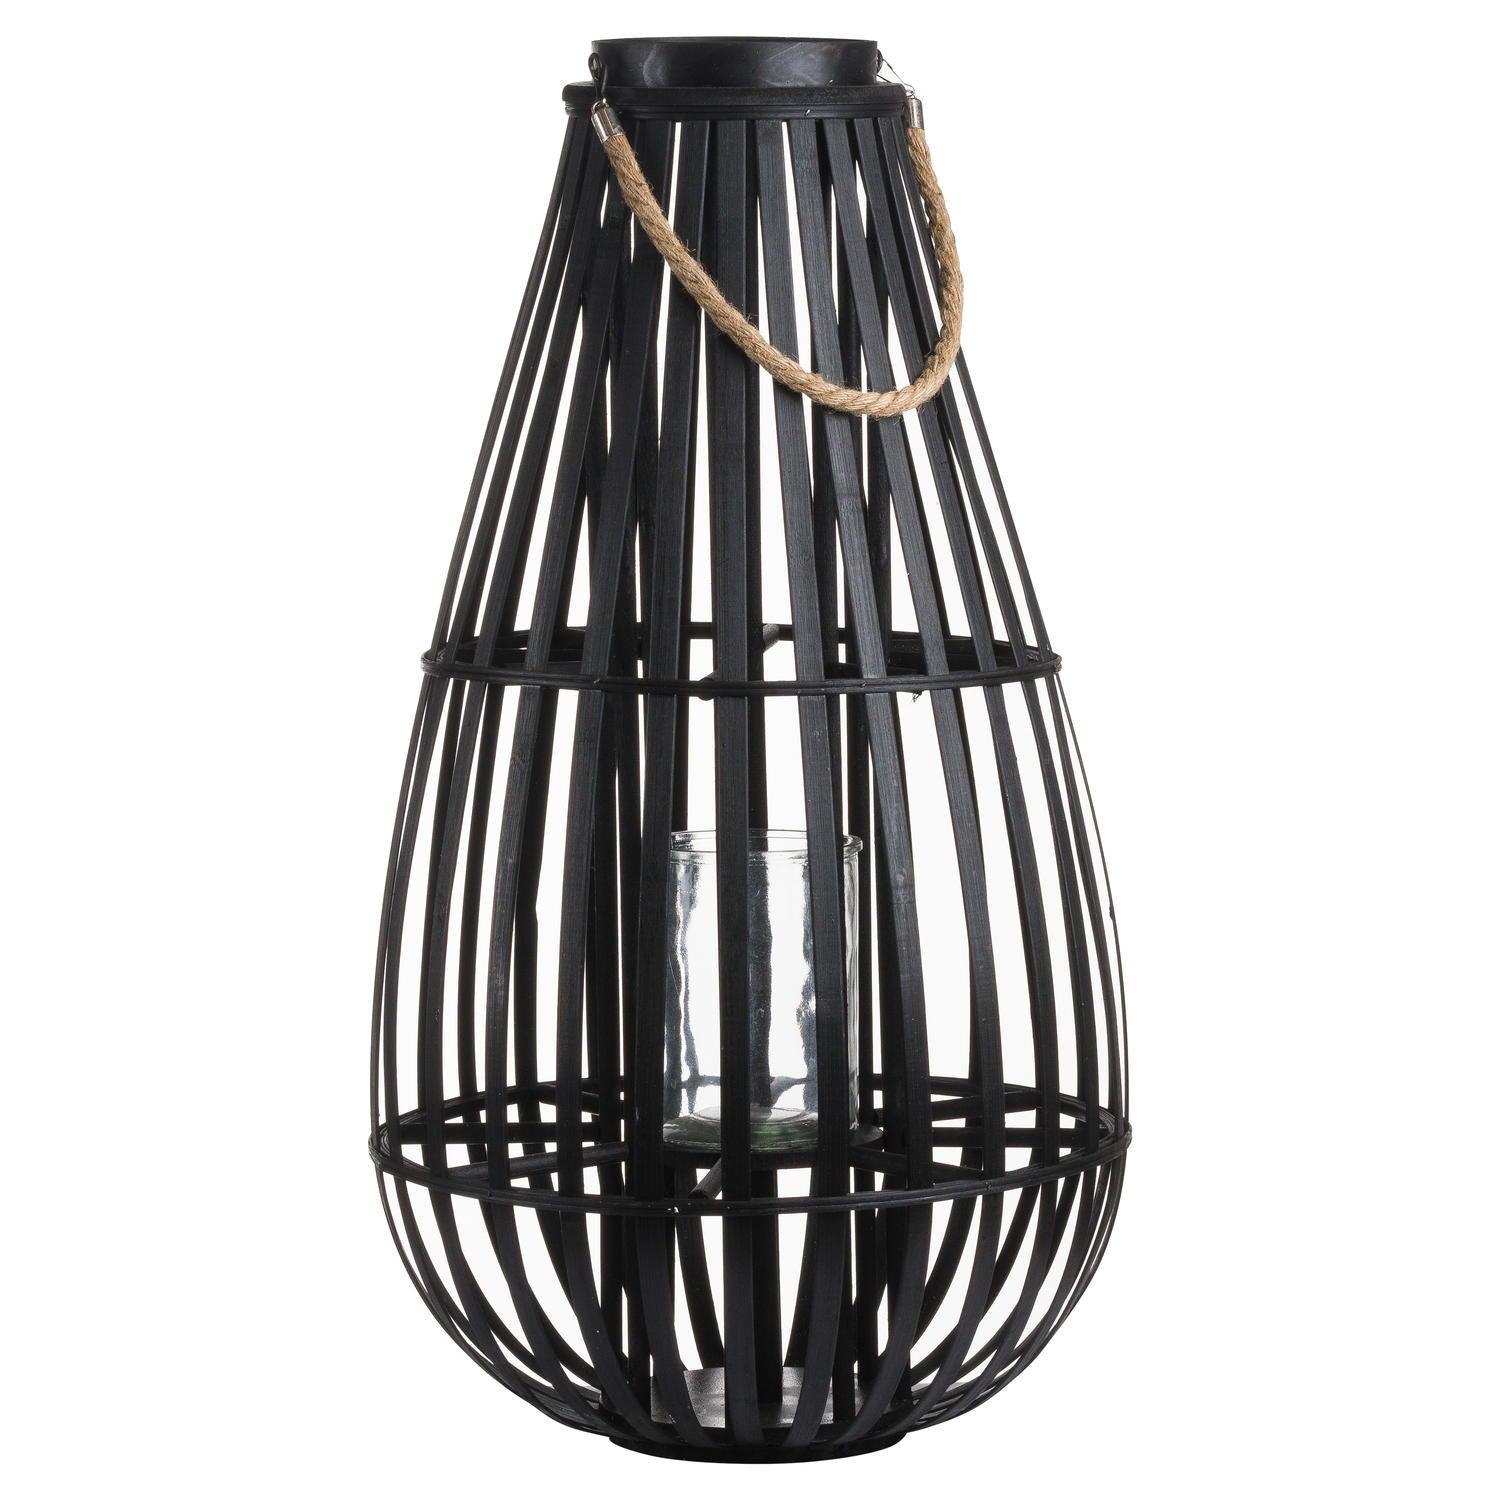 Large Floor Standing Domed Wicker Lantern With Rope Detail - Vookoo Lifestyle